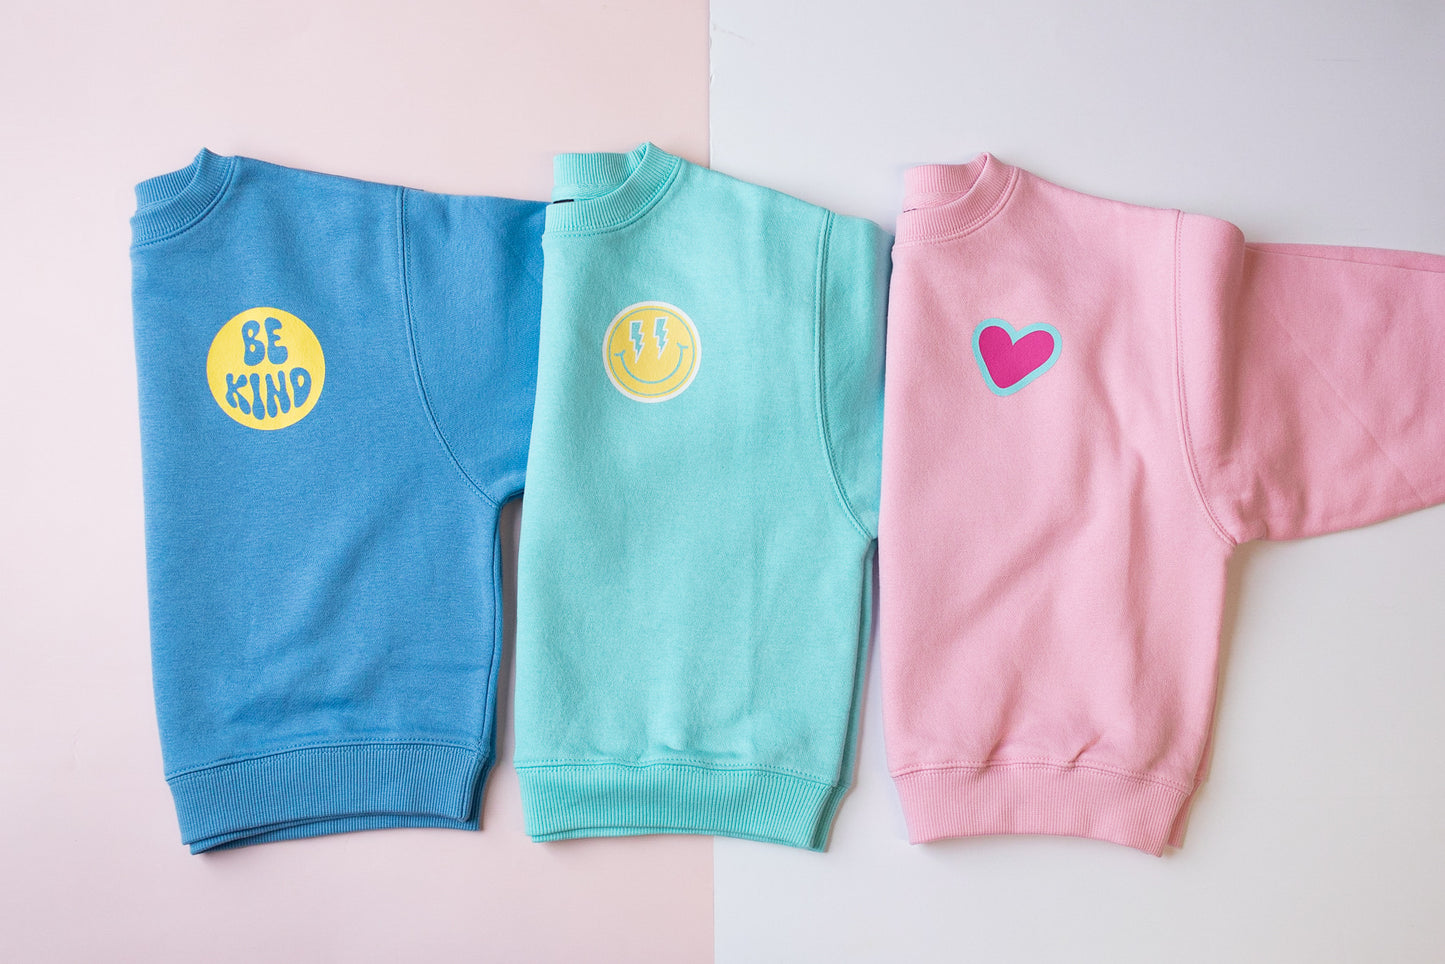 XOXO by magpies | Blue Be Kind Sweatshirt, Kids